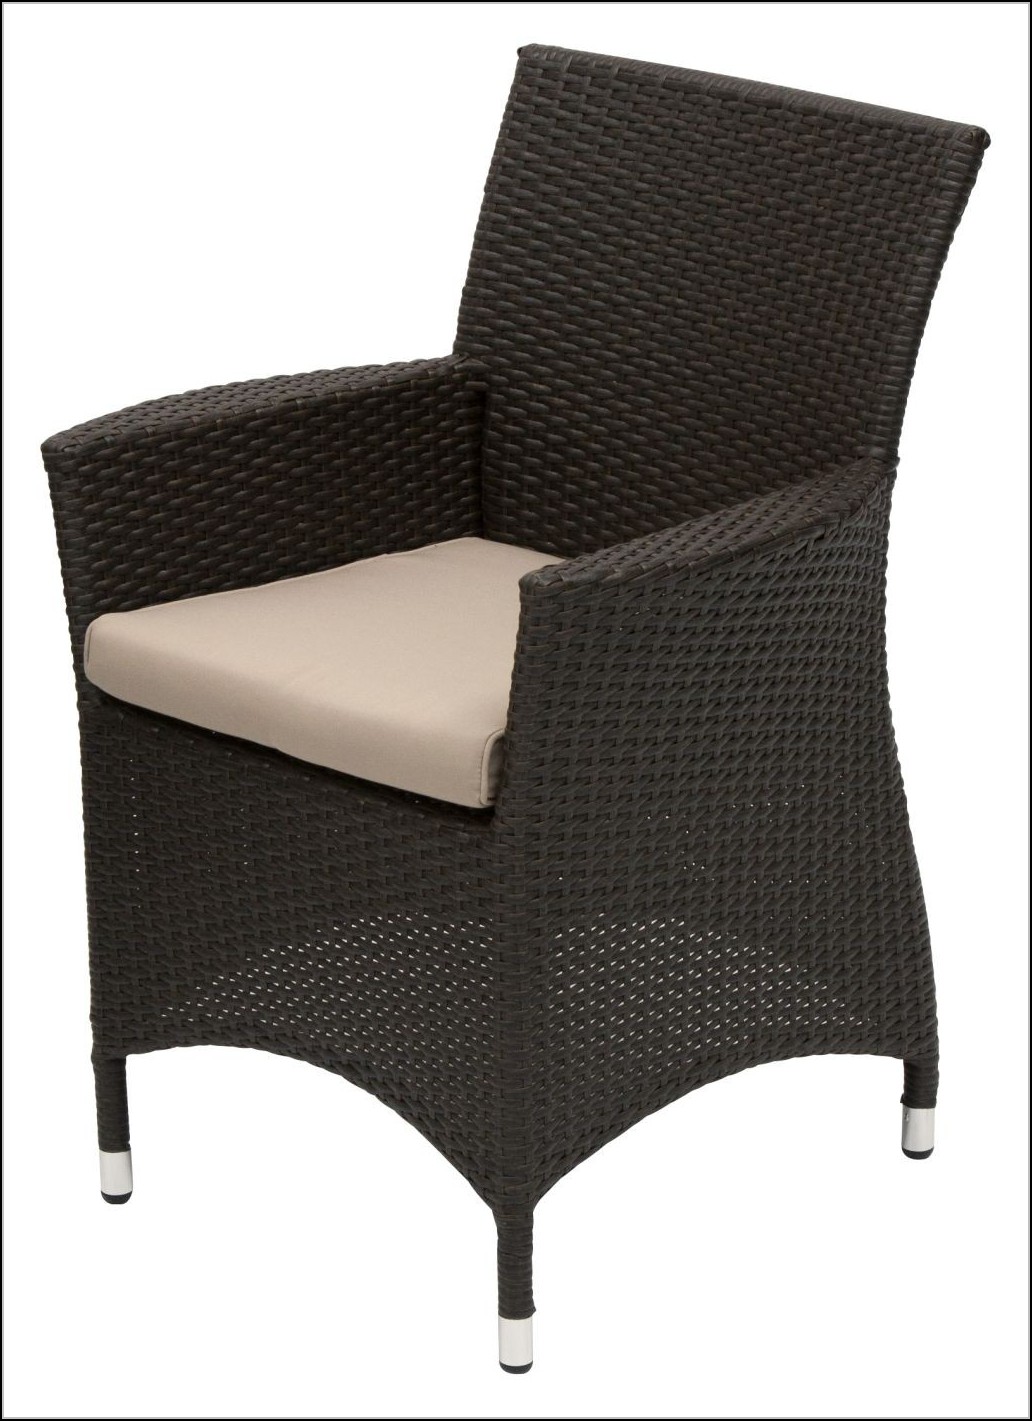 Wicker Dining Chairs Outdoor